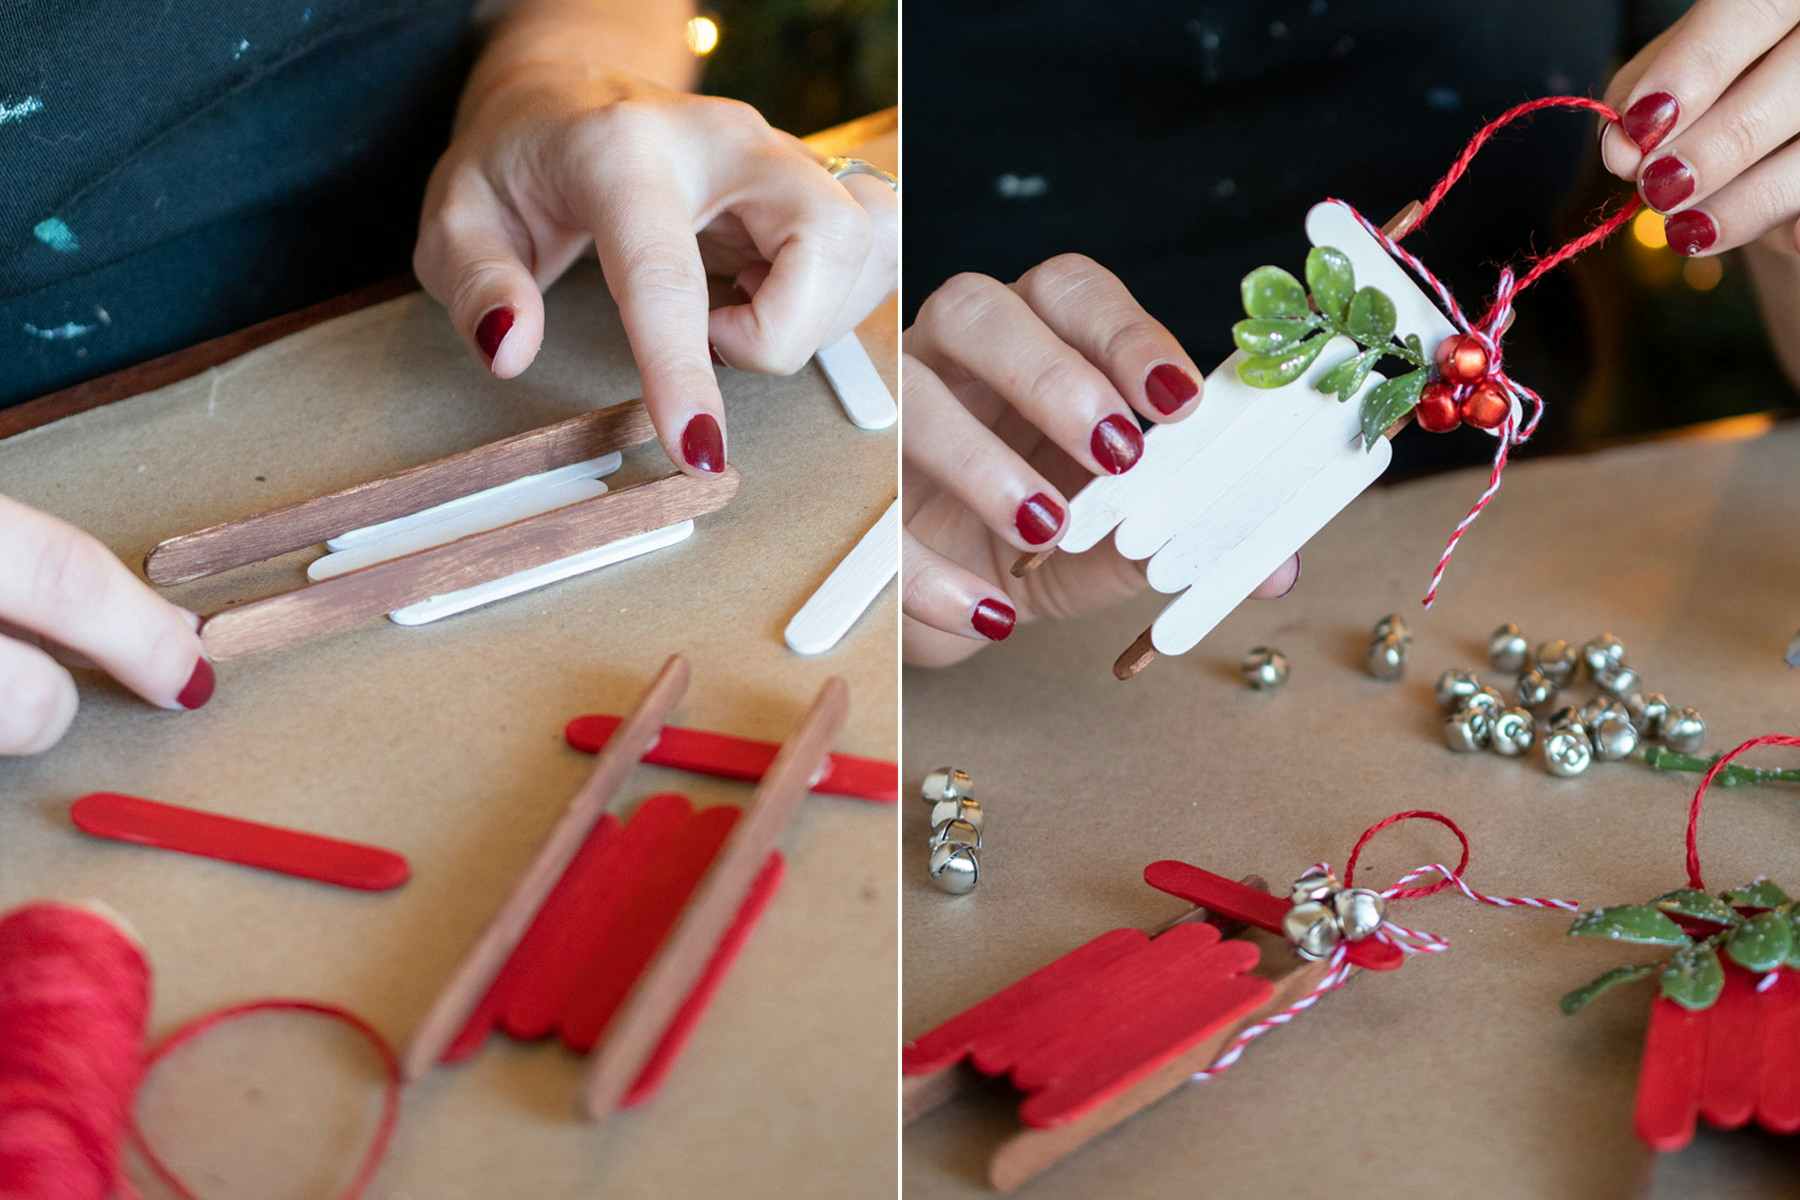 someone gluing popsicle sticks together and a sled ornament